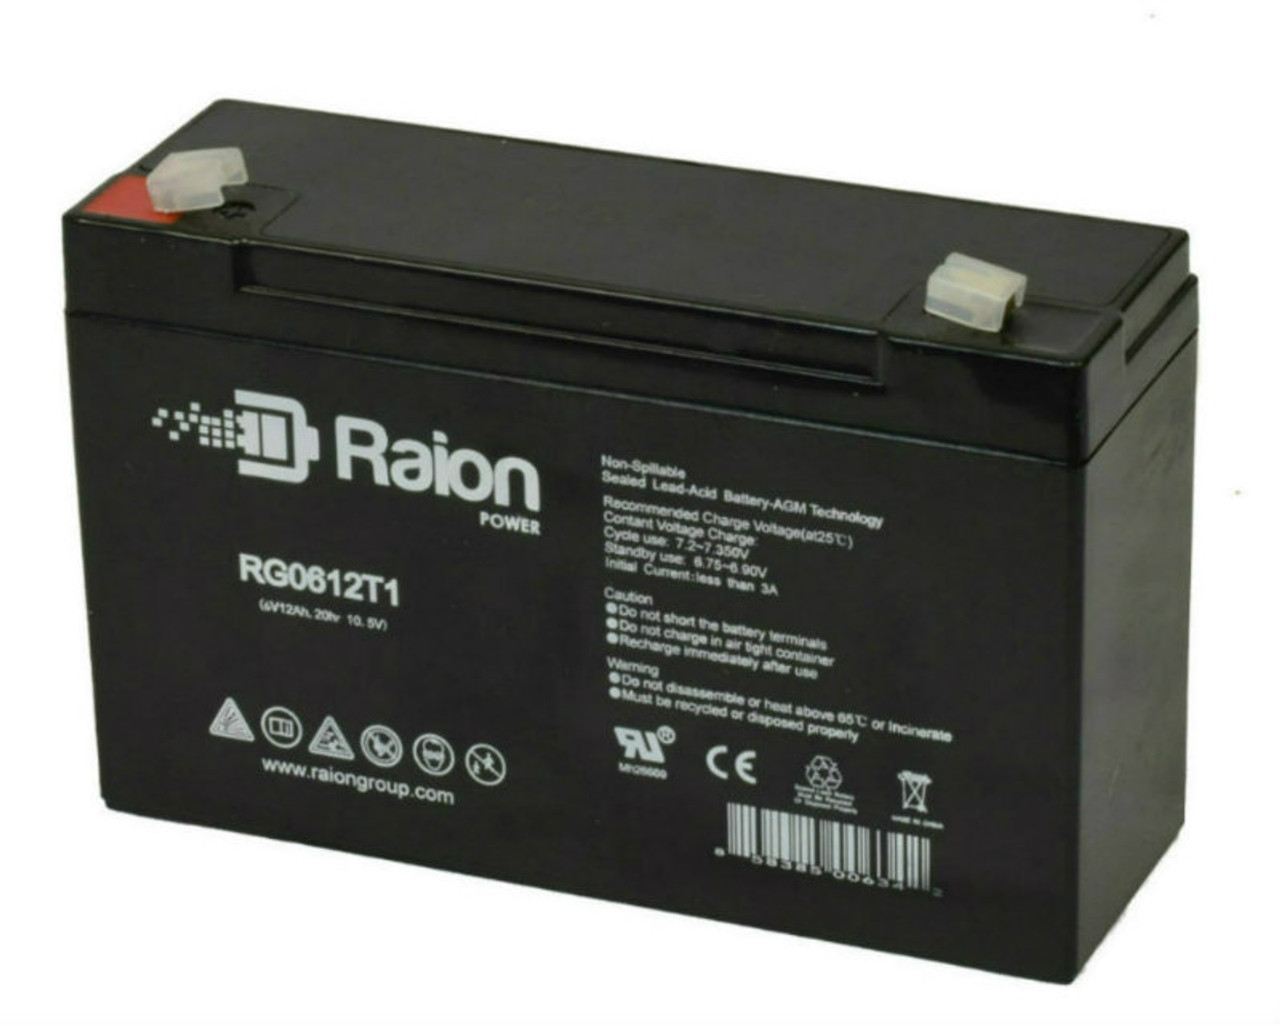 Raion Power RG06120T1 Replacement Battery for Liven LV12-6